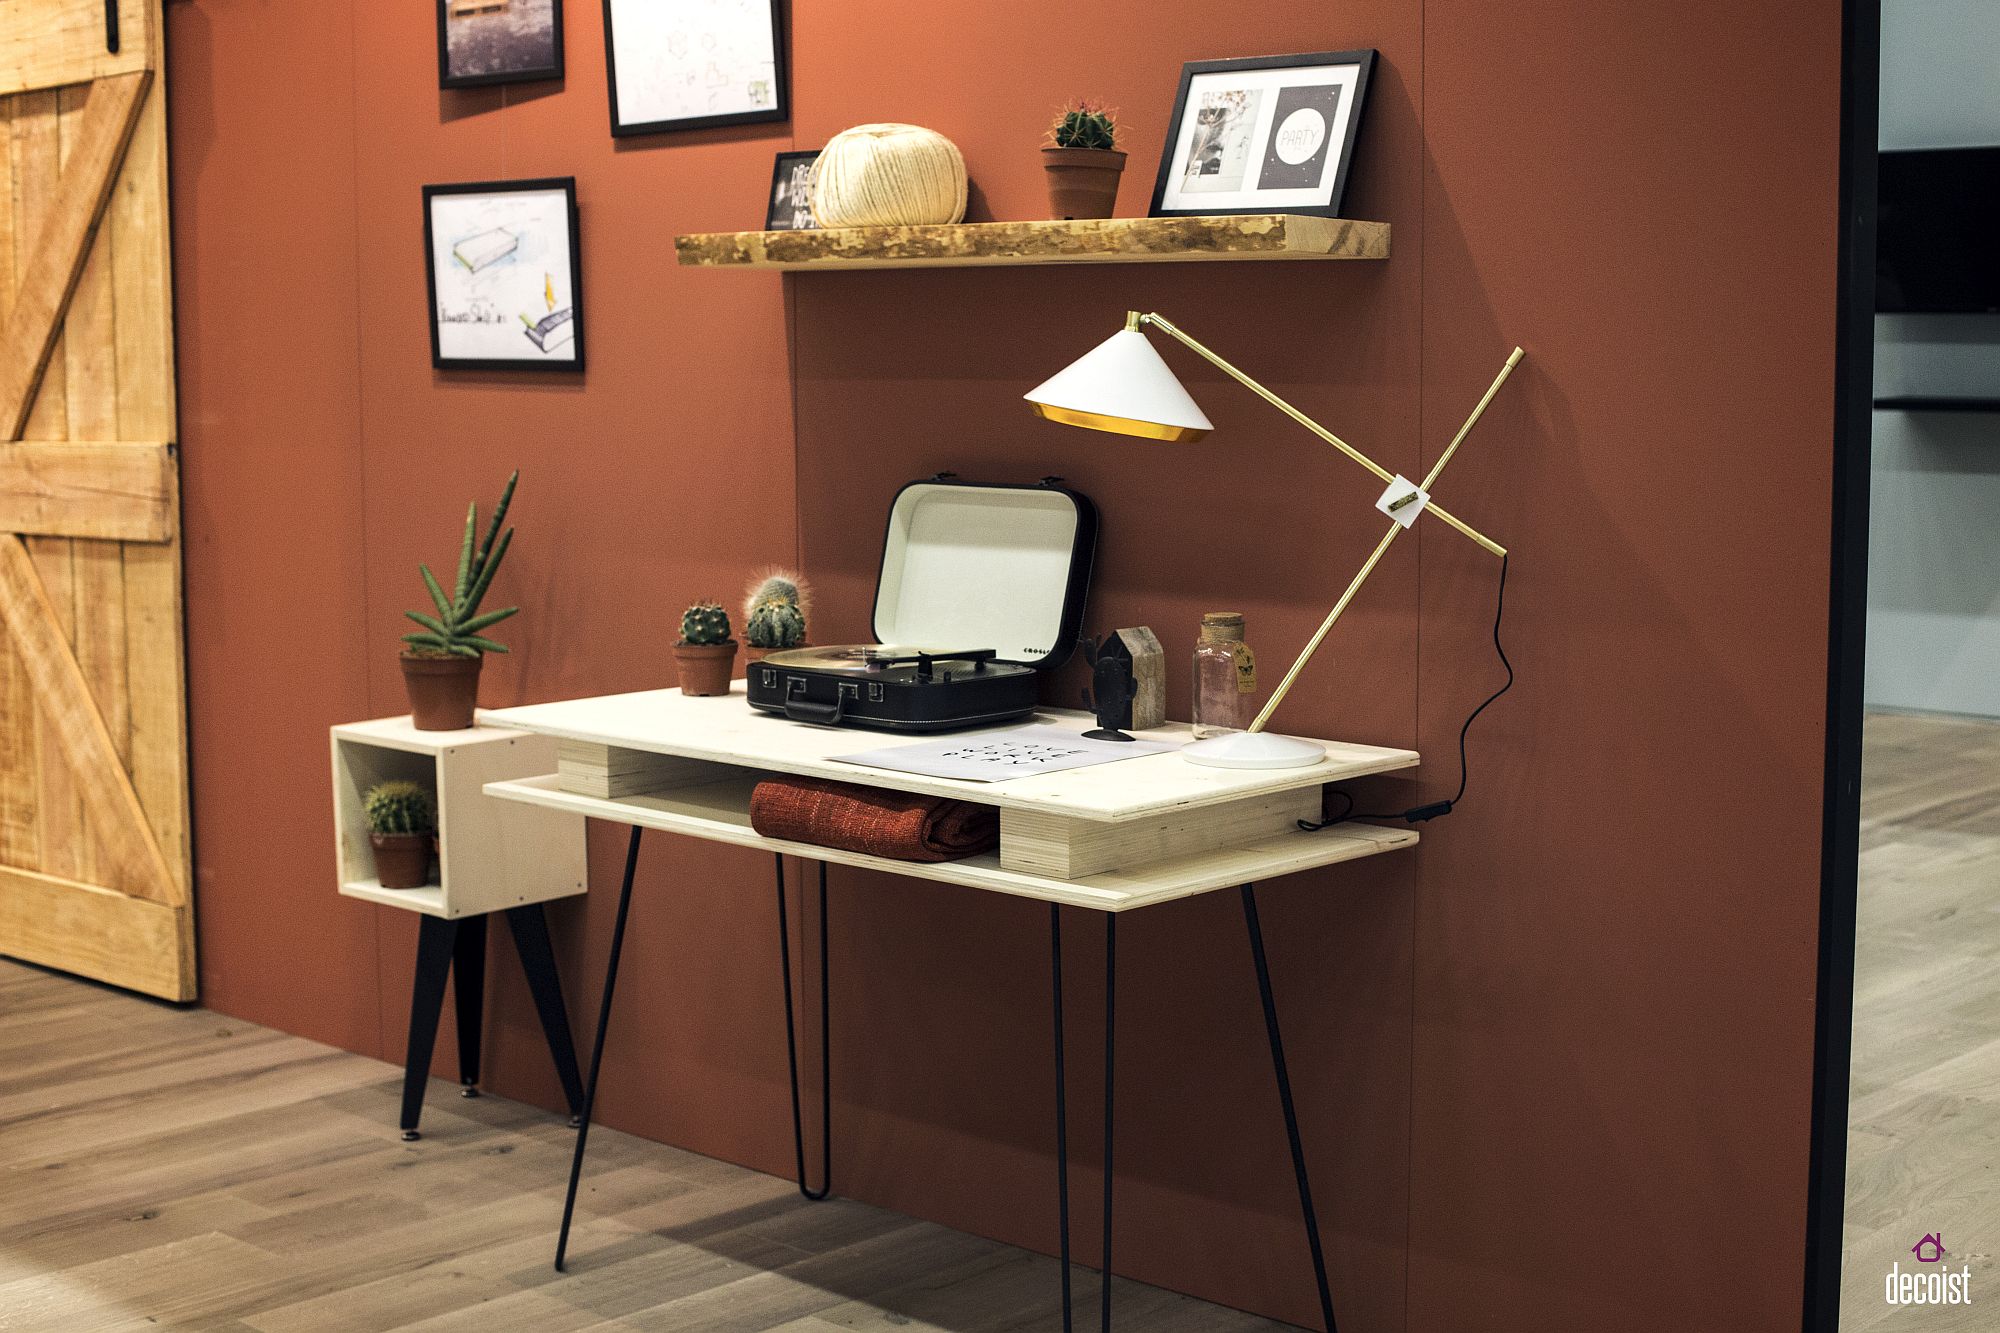 Ultra-stylish-work-desk-with-hairpin-legs-turns-even-the-smallest-space-into-workzone